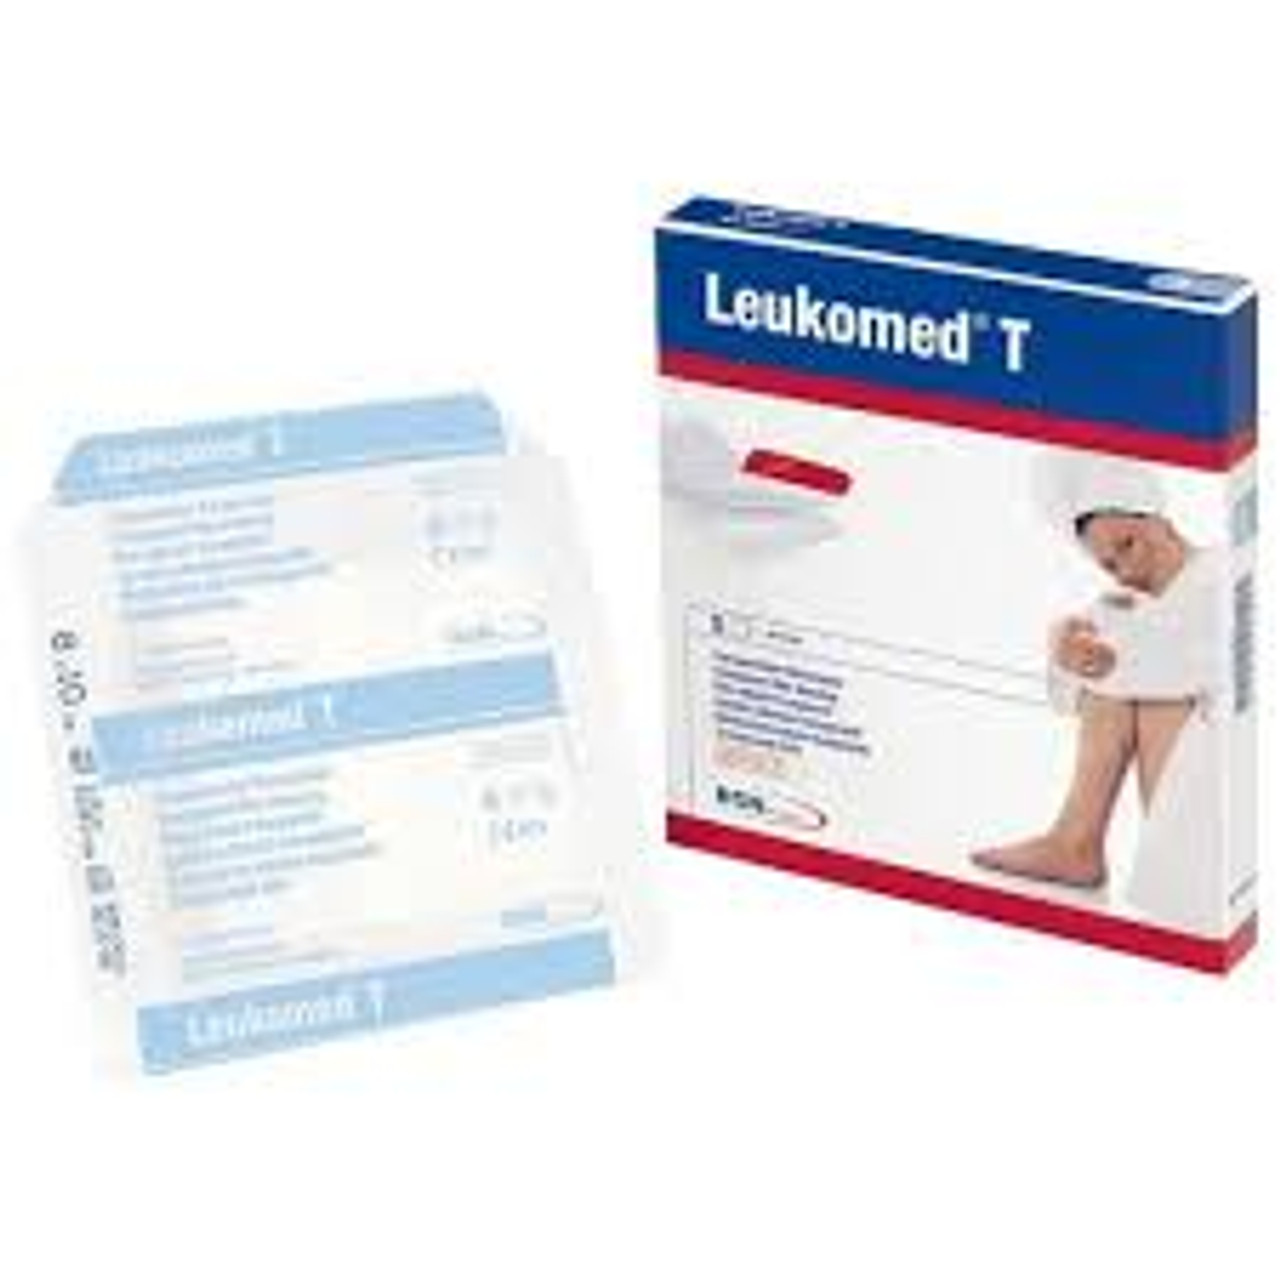 BSN-7238206 LEUKOMED T PLUS Waterproof Adhesive Transparent Sterile Dressing with Absorbent Pad 7.2CM X 5CM